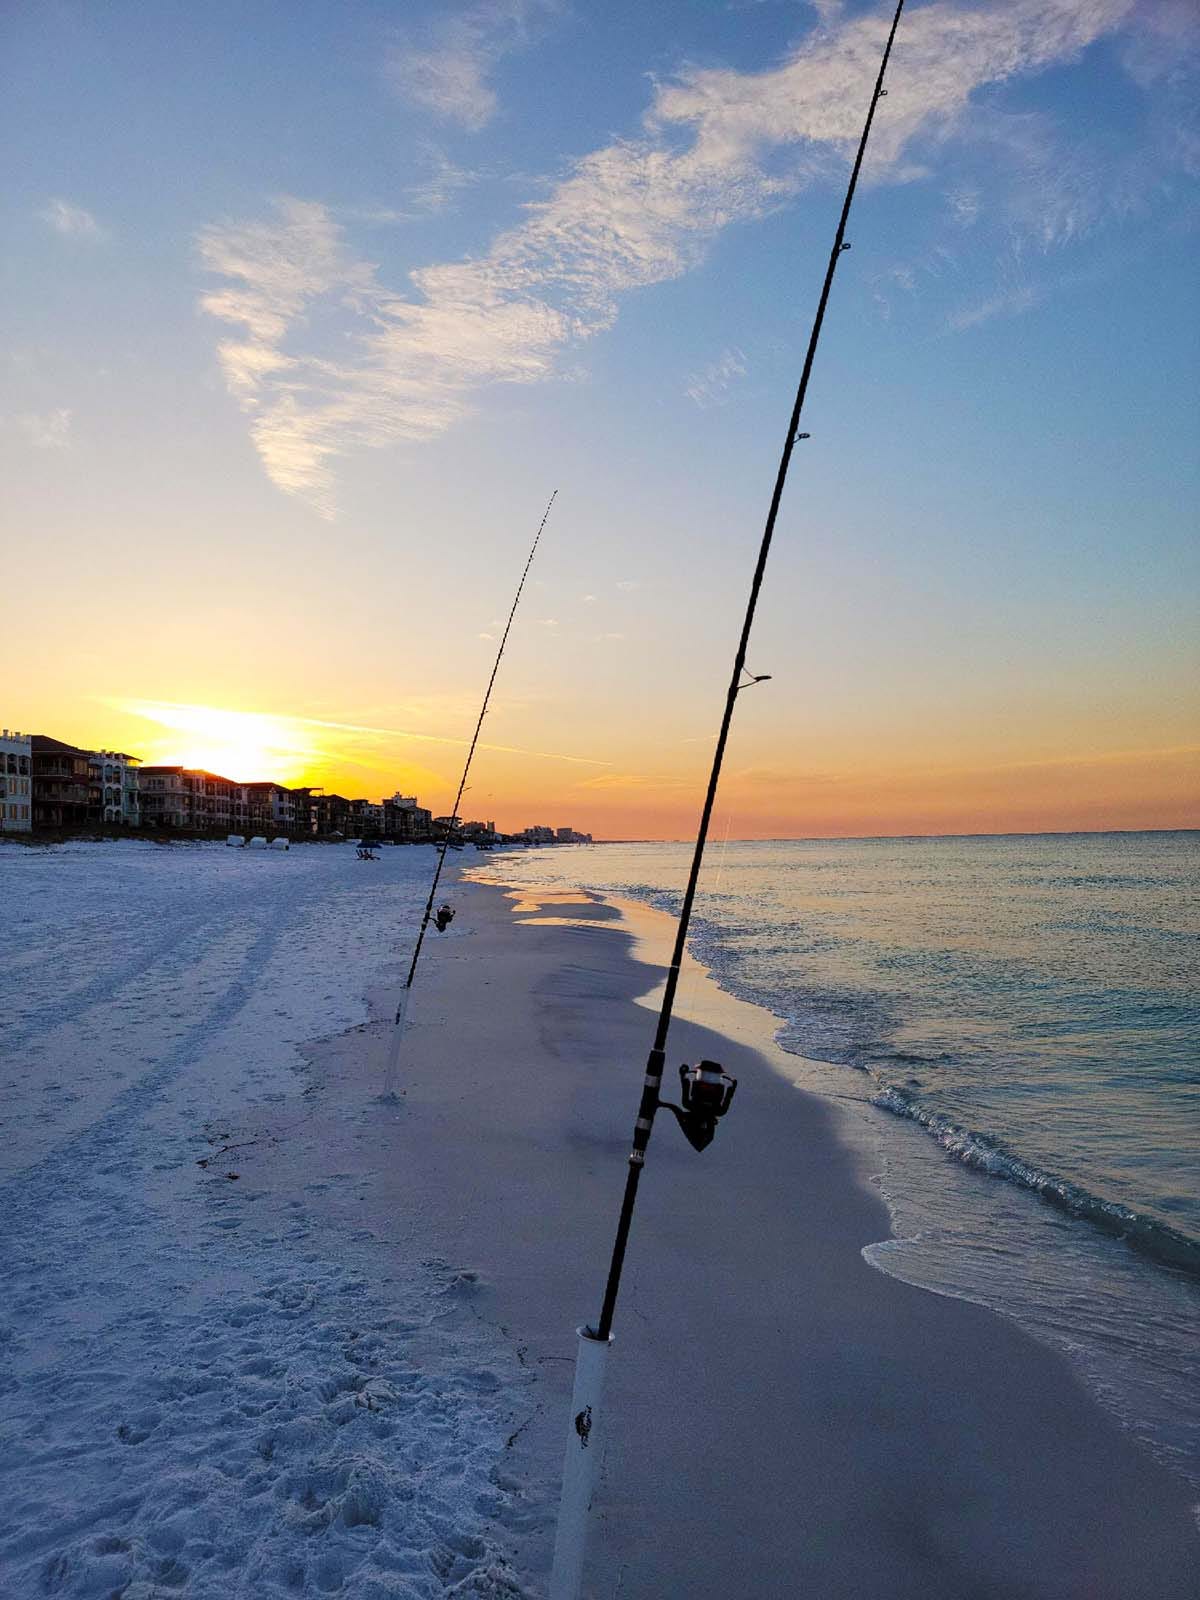 Surf Fishing, Pompano and Patience - by Hank Shaw